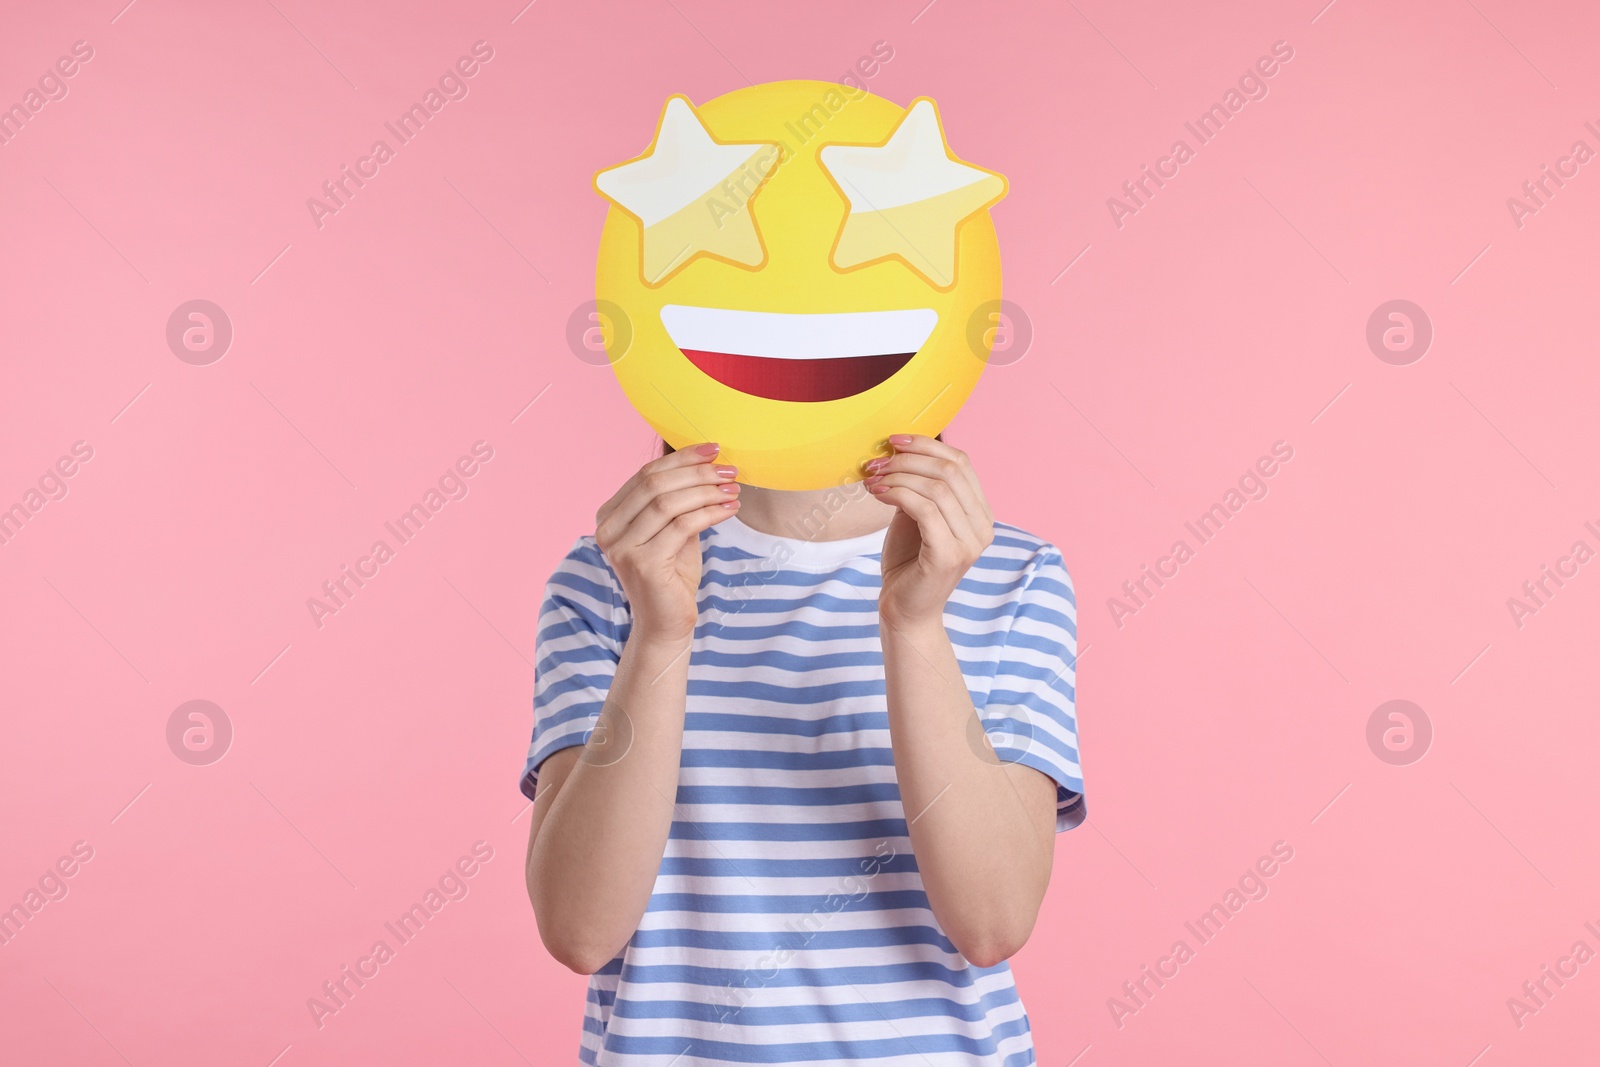 Photo of Woman holding emoticon with stars instead of eyes on pink background